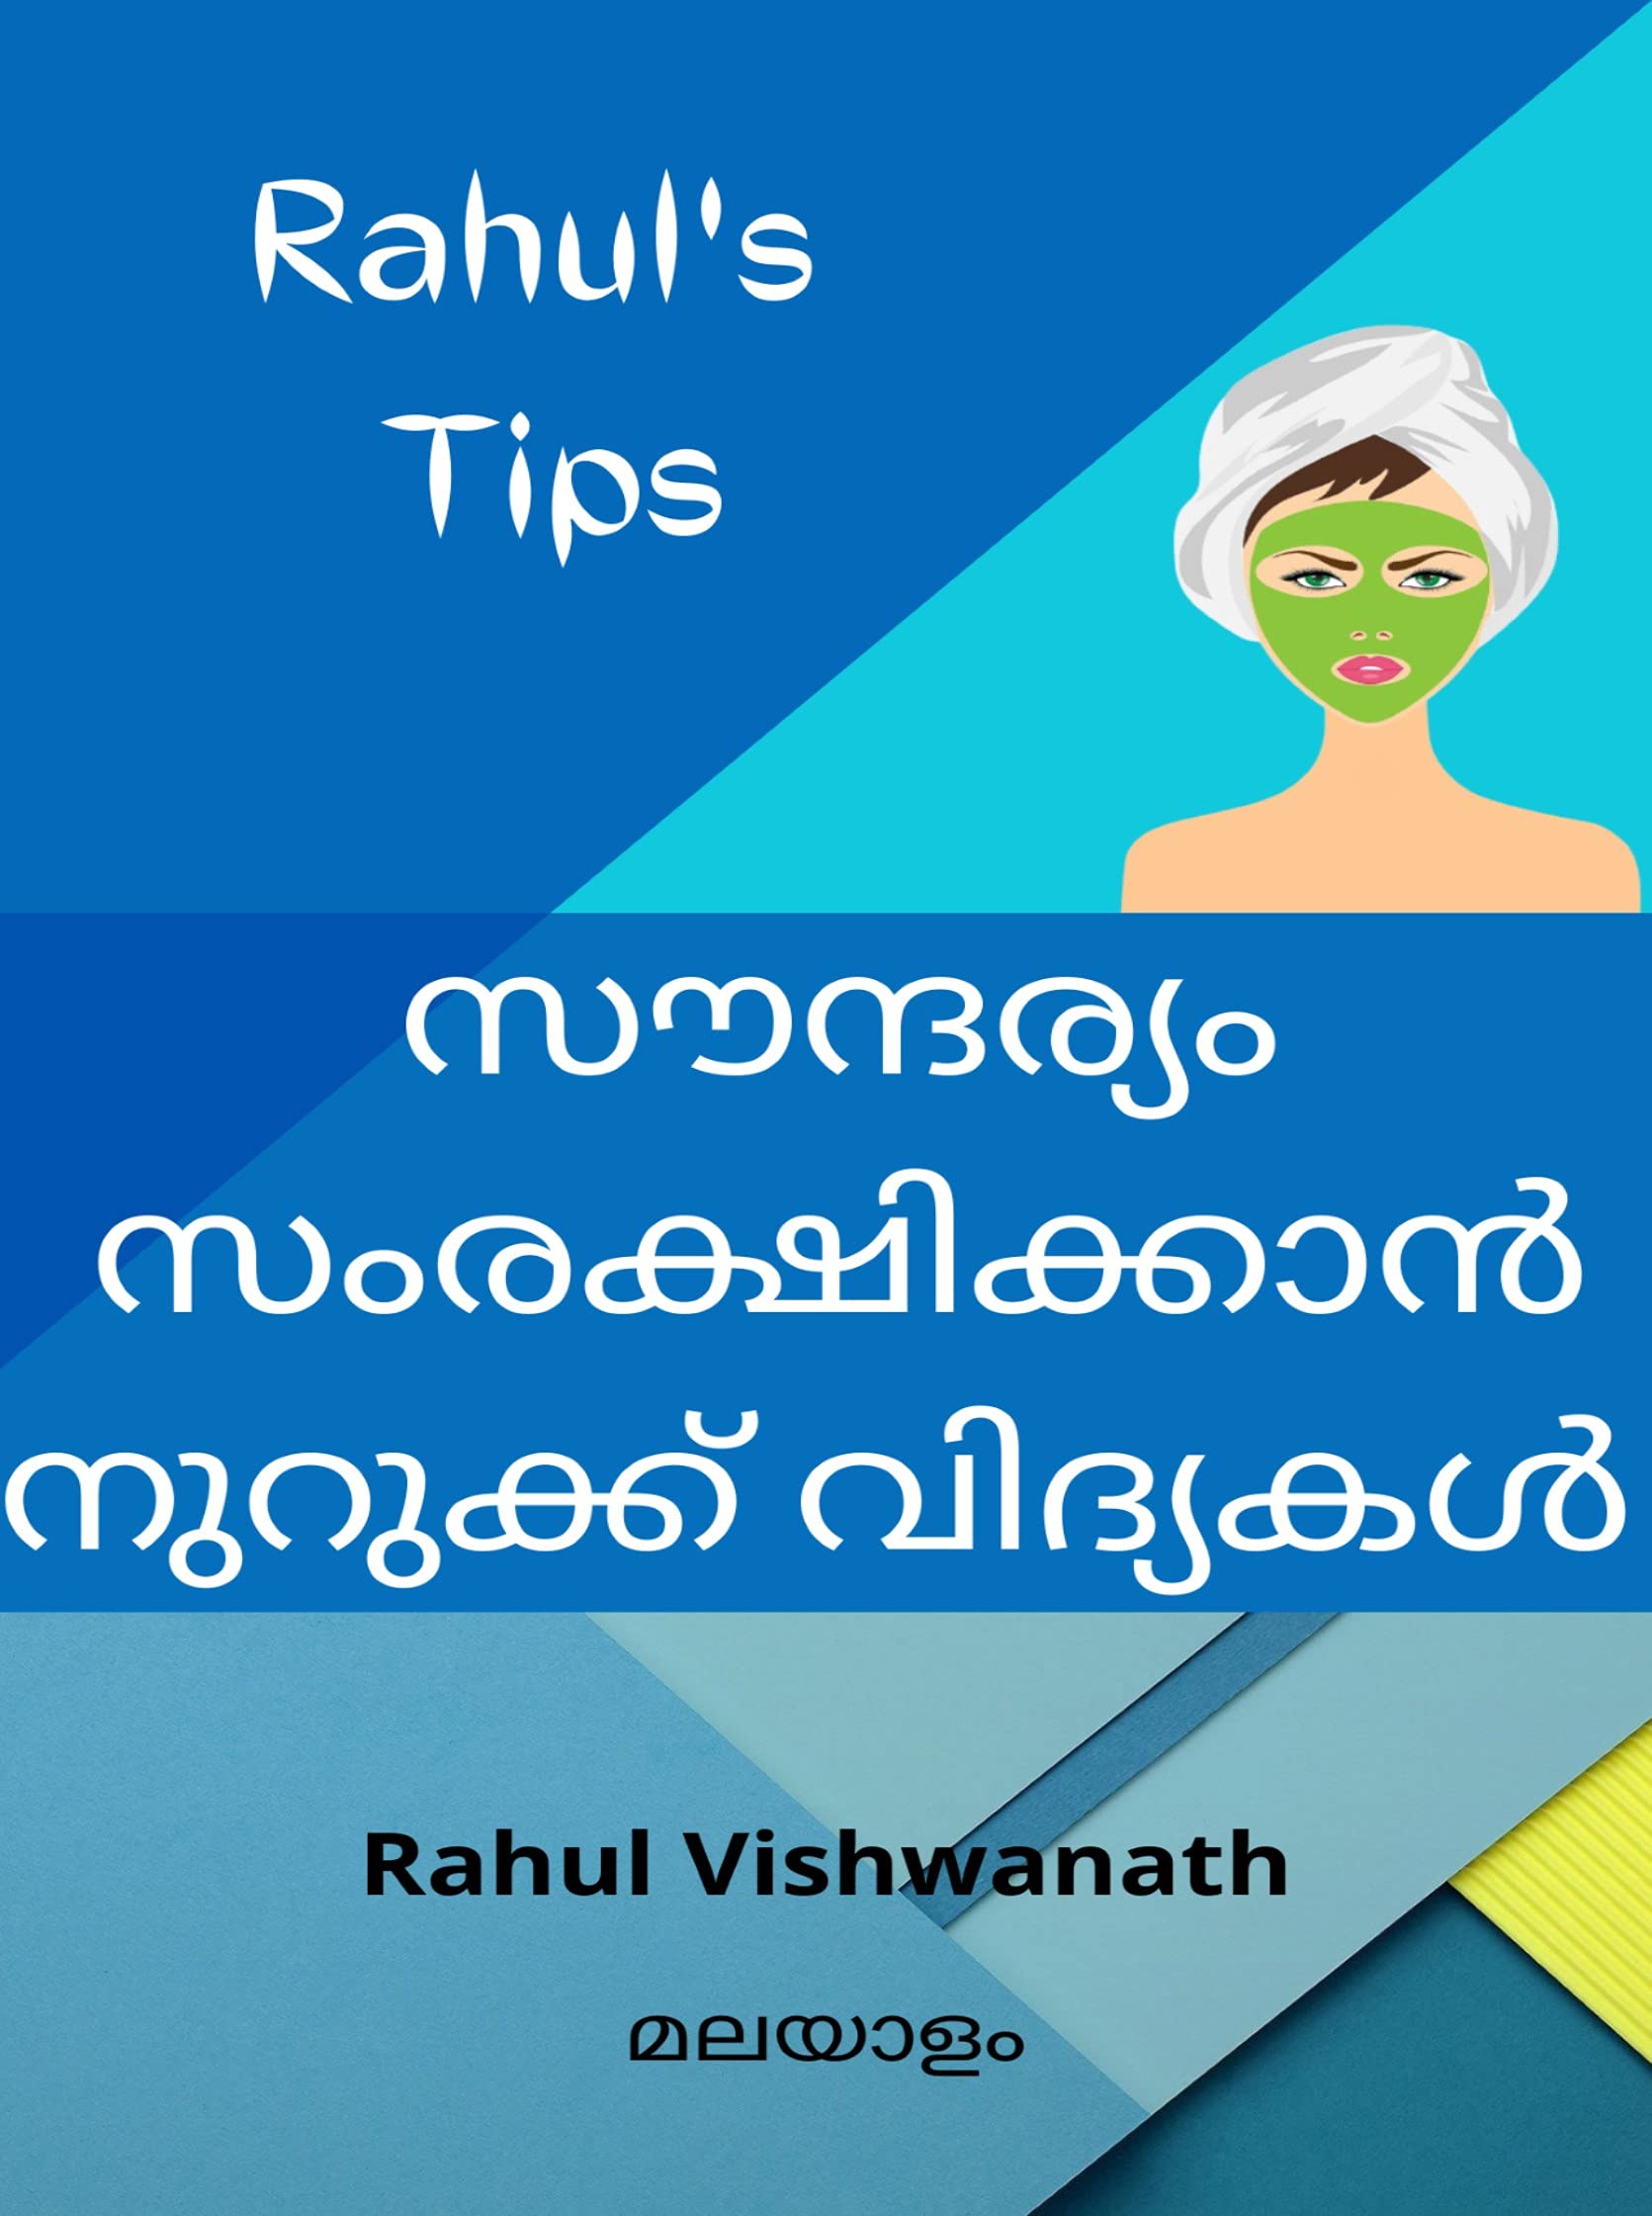 andre martins recommends Beauty Tips In Malayalam